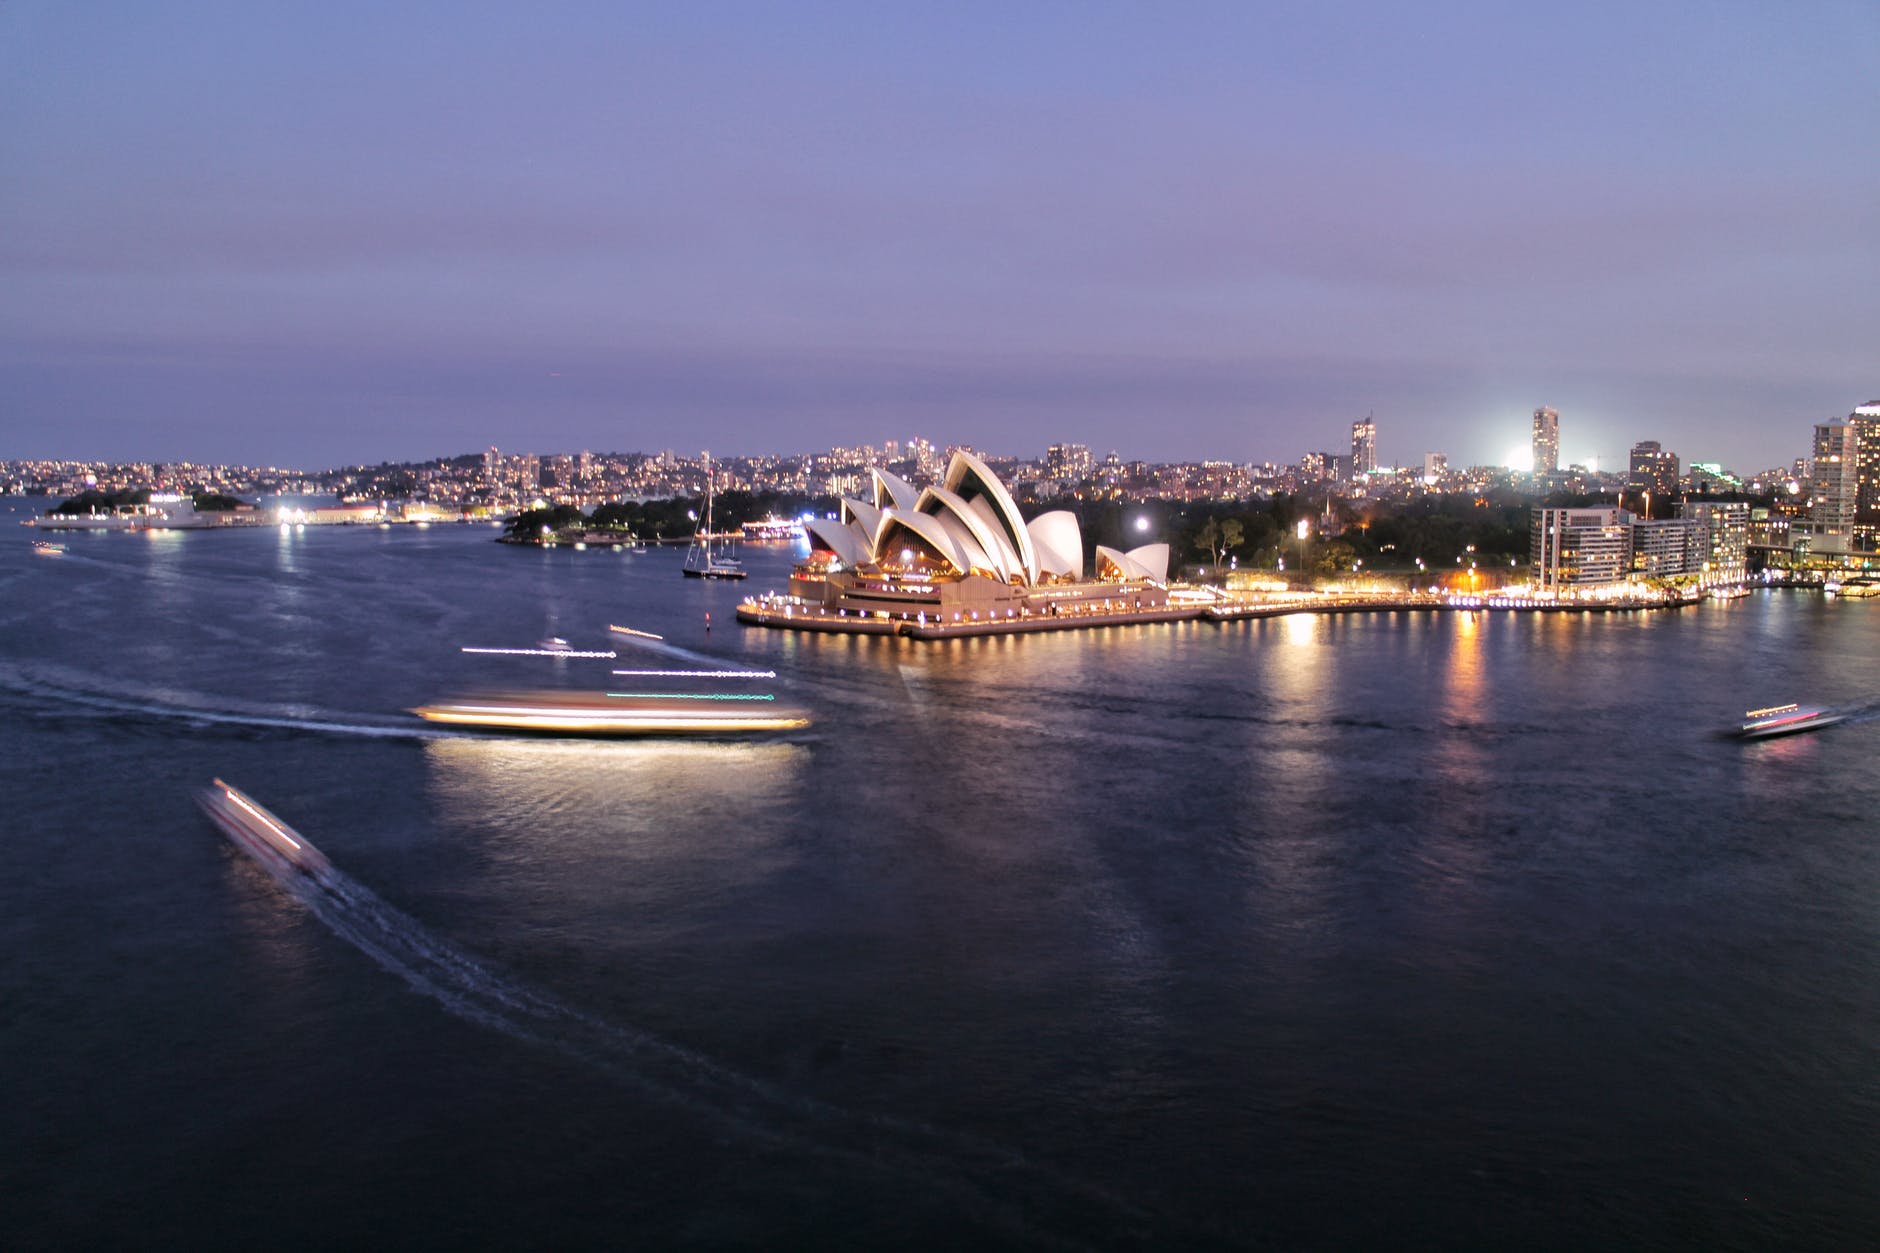 List of the Hostels in Sydney that I like the most